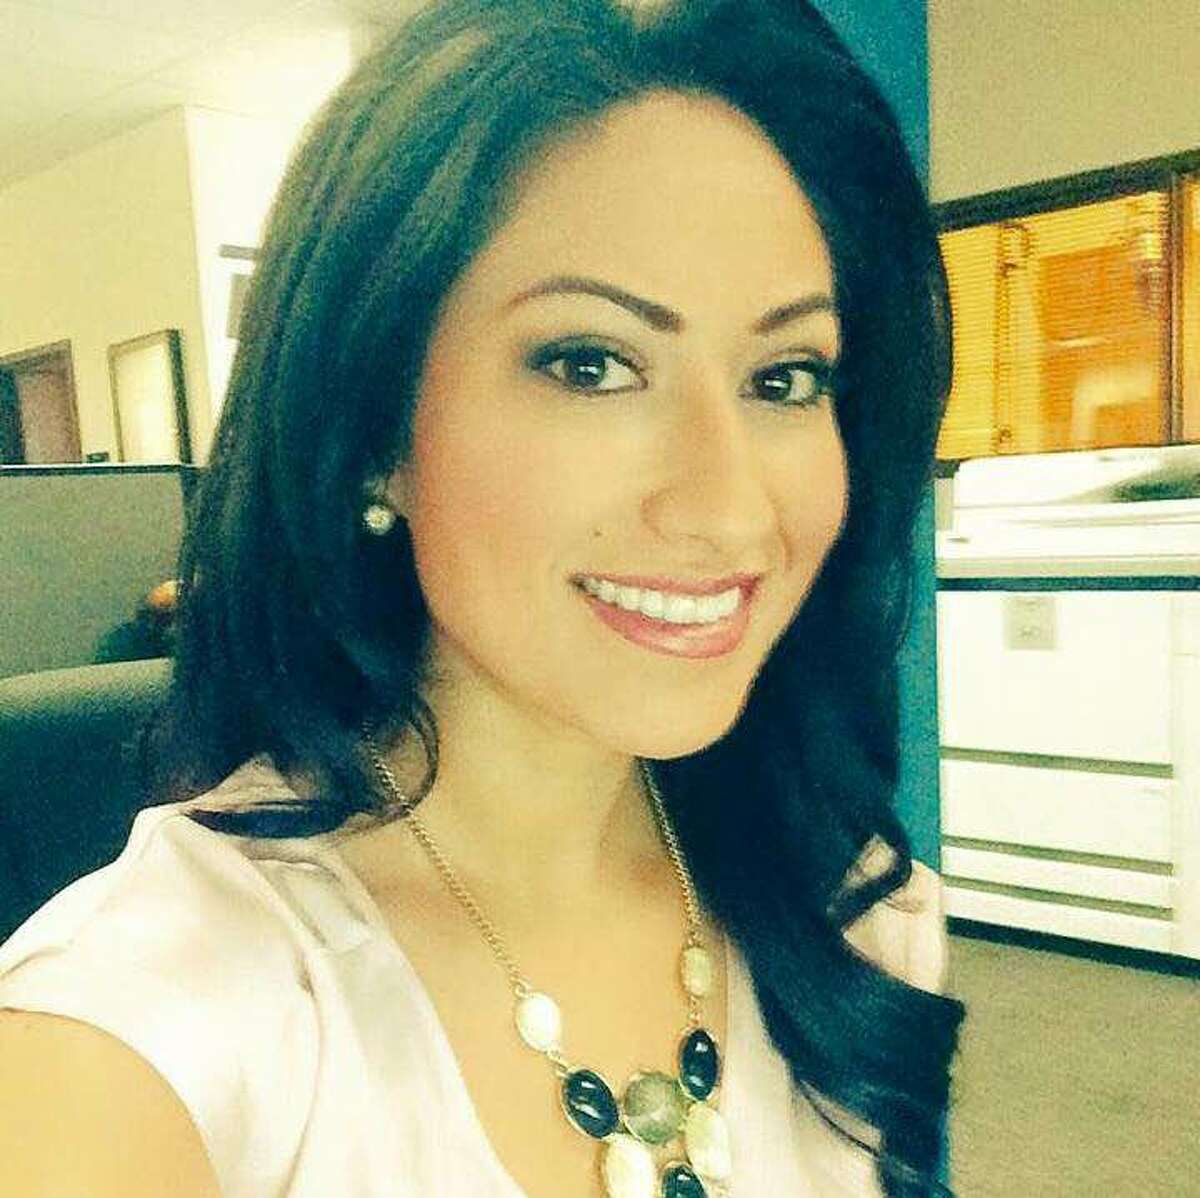 Mayra Moreno, formerly of KENS-TV, now anchors on Houston's KTRK. She received negative reaction and positive support for her 'Buenos Dias' on TV Memorial Weekend.